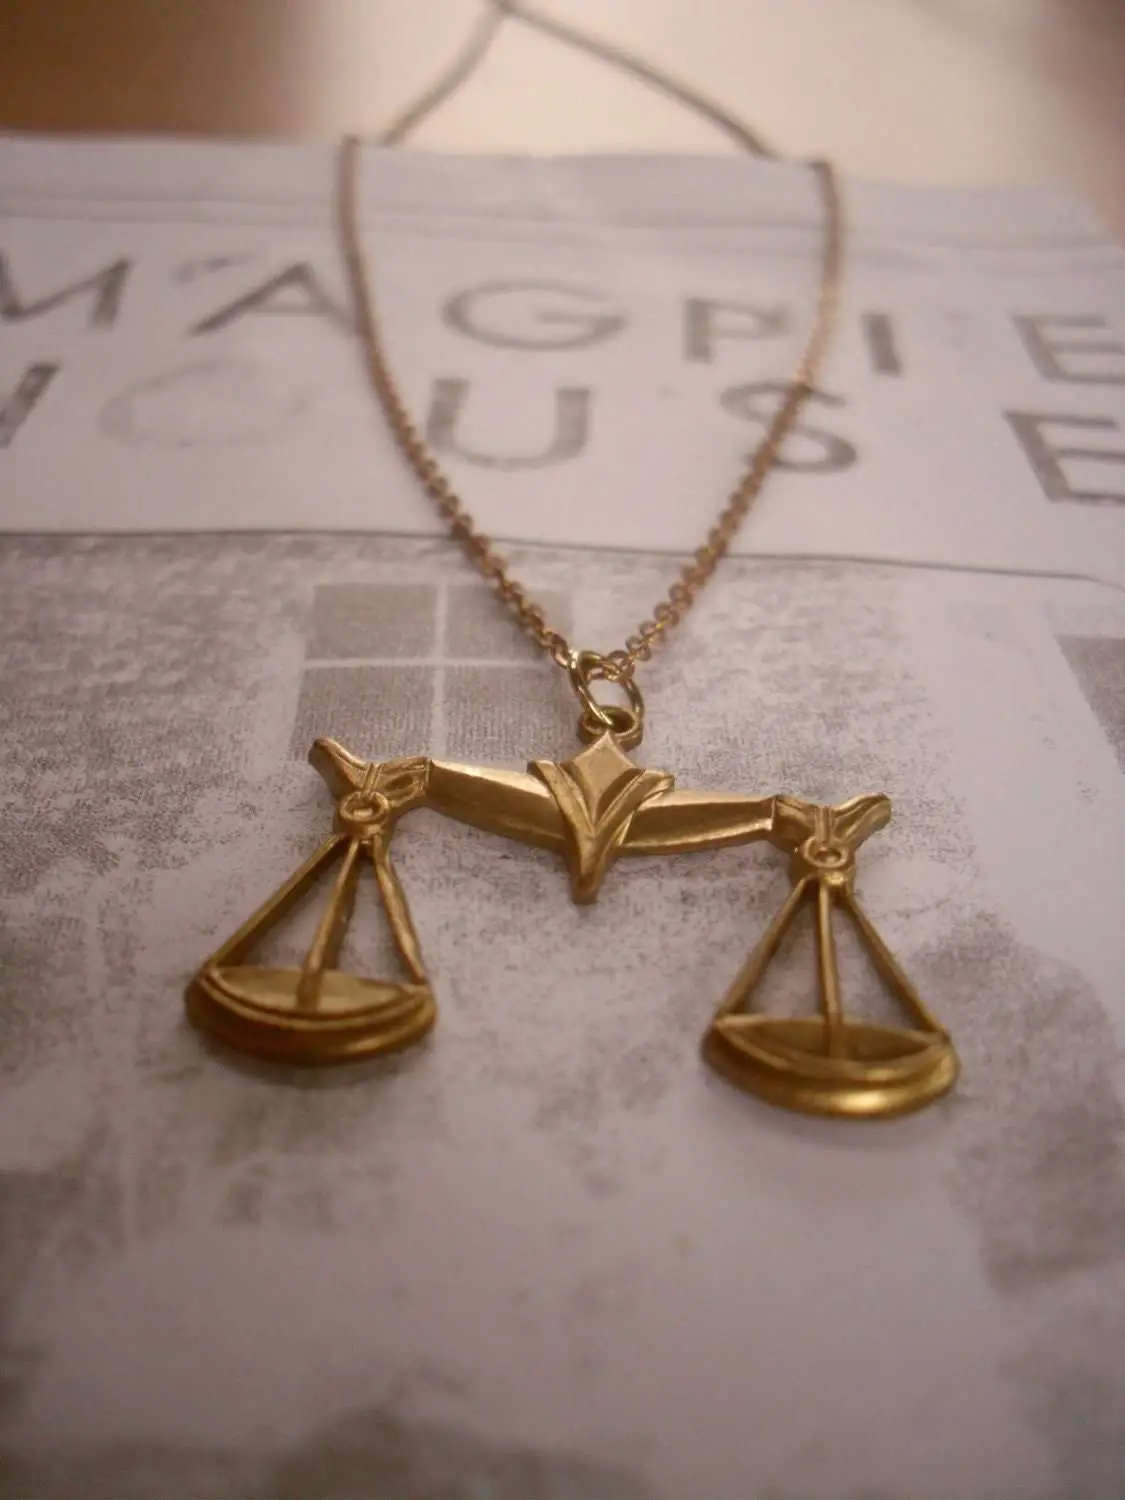 Vintage Style Gold Weighing Scales Charm Necklace Long